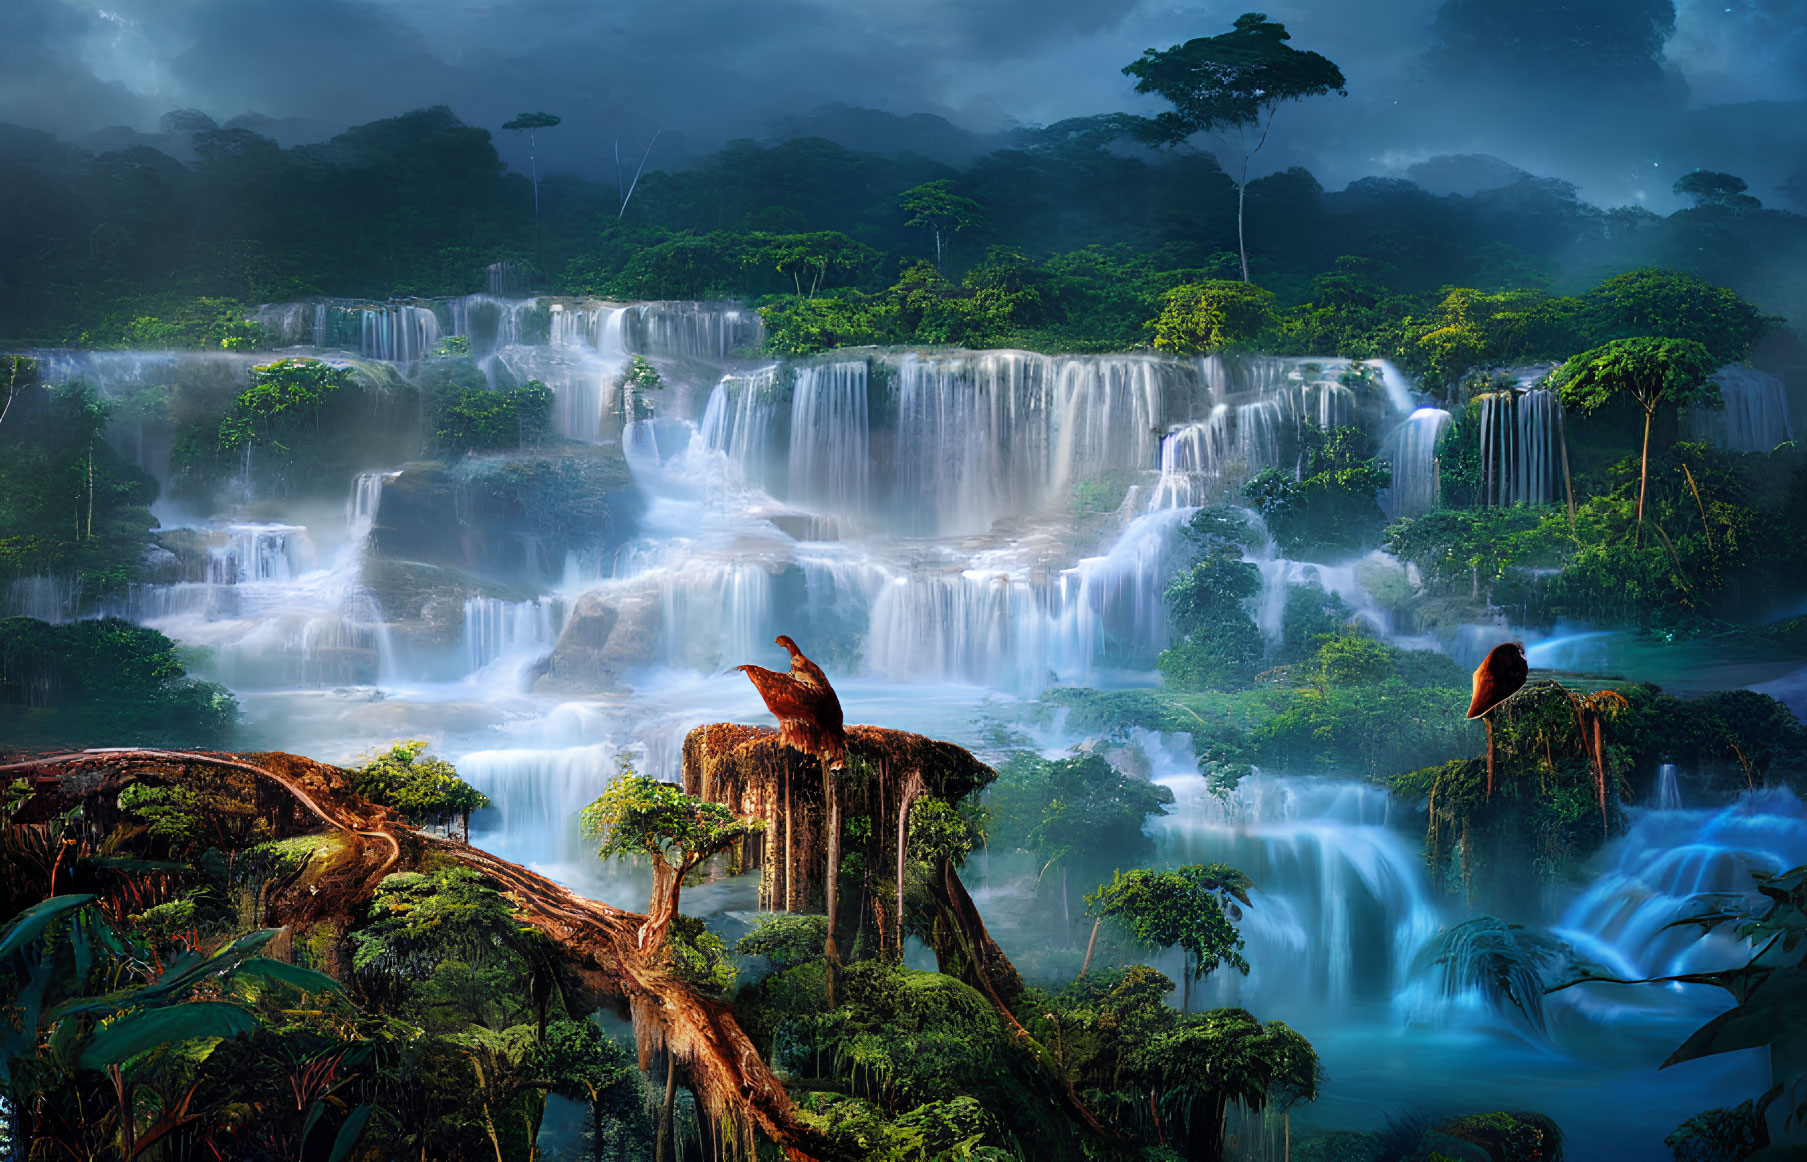 Majestic multi-tiered waterfall in lush jungle with mist and eagles.